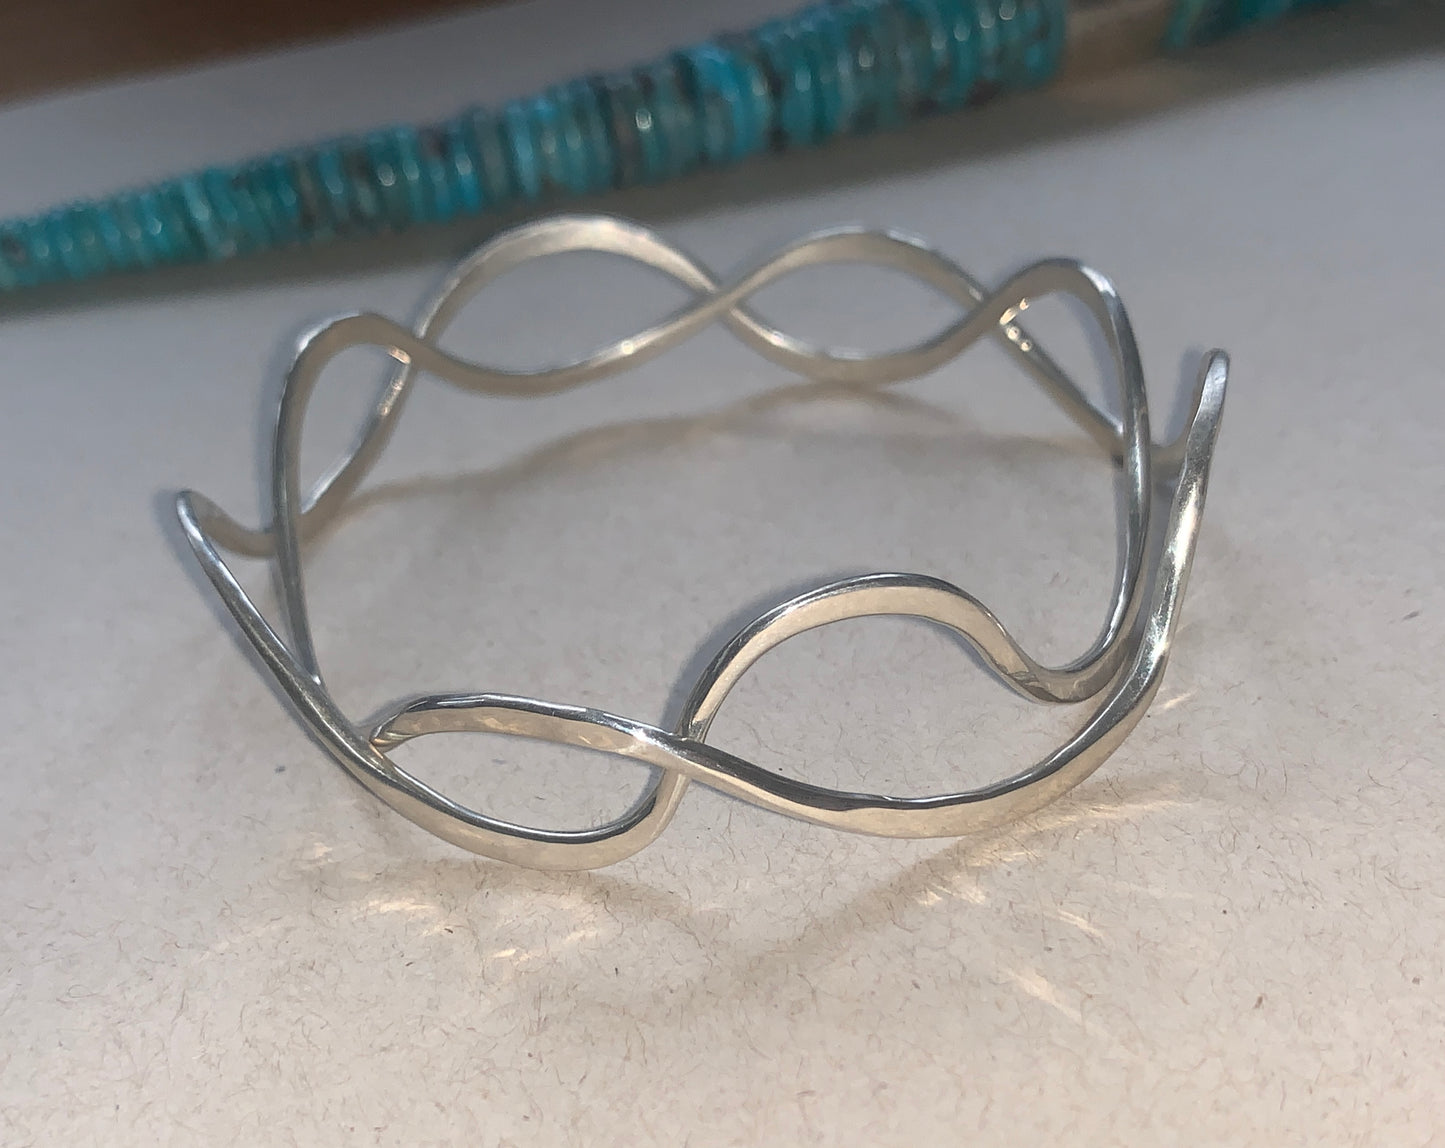 New - “River” Bangles in FAIRMINED Sterling by J Dewey